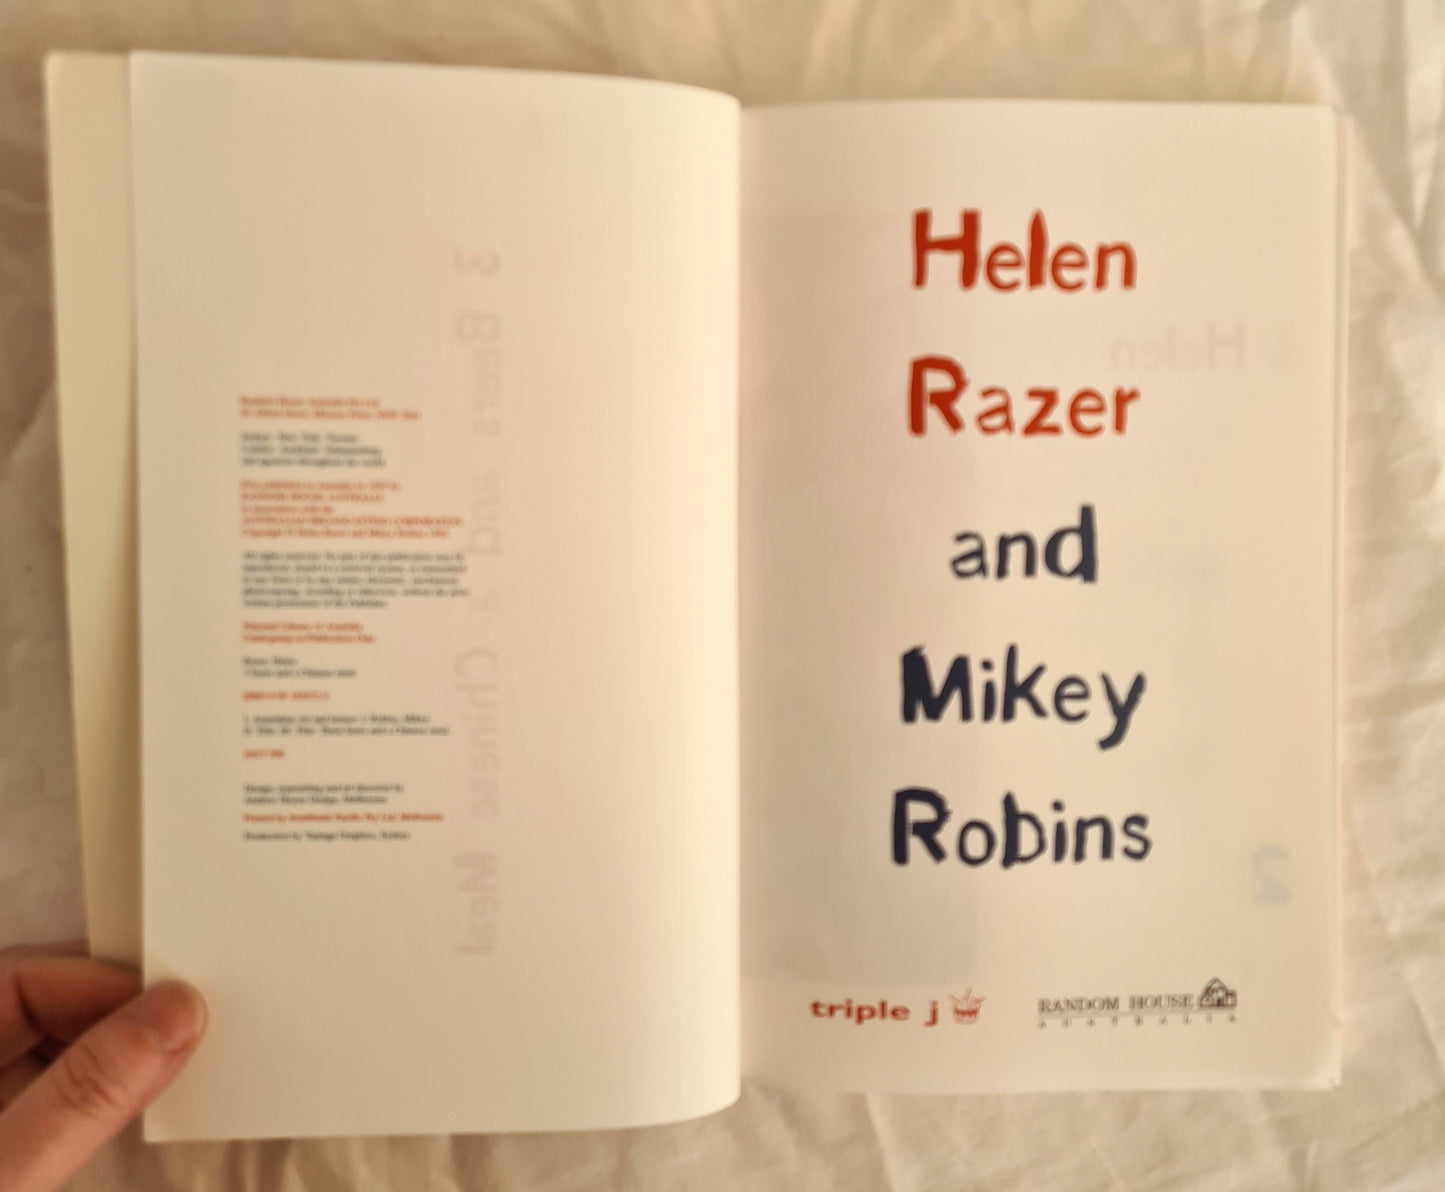 3 Beers and a Chinese Meal by Helen Razer and Mikey Robins